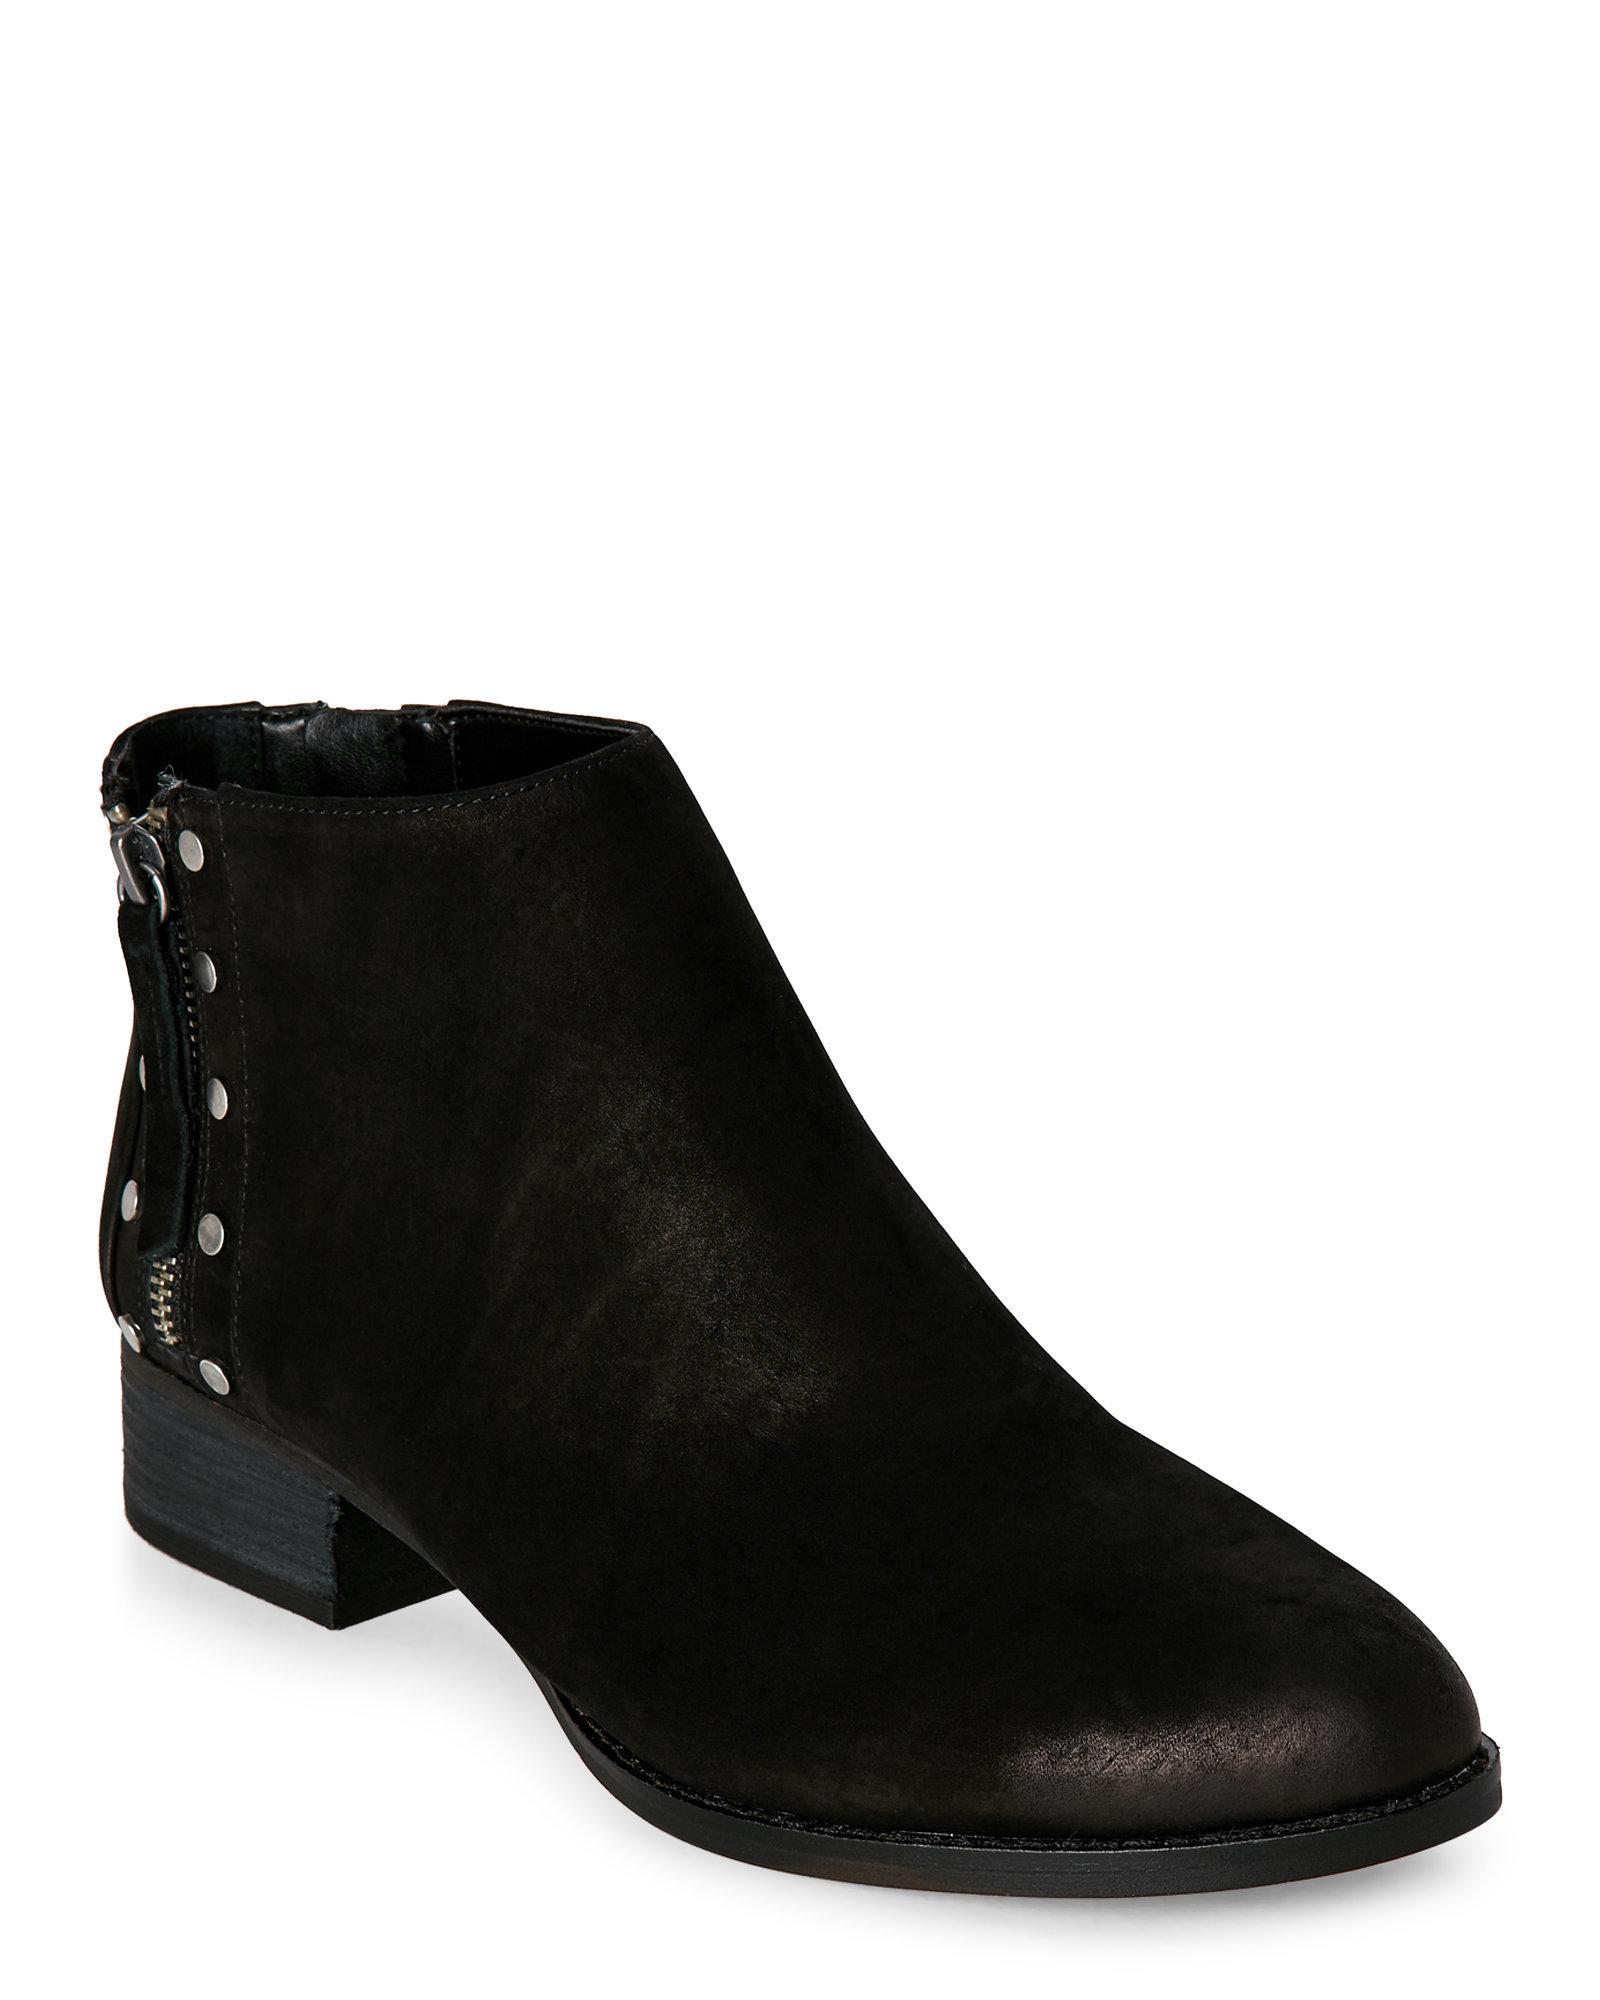 Lyst - Vince Camuto Black Catile Studded Ankle Boots in Black